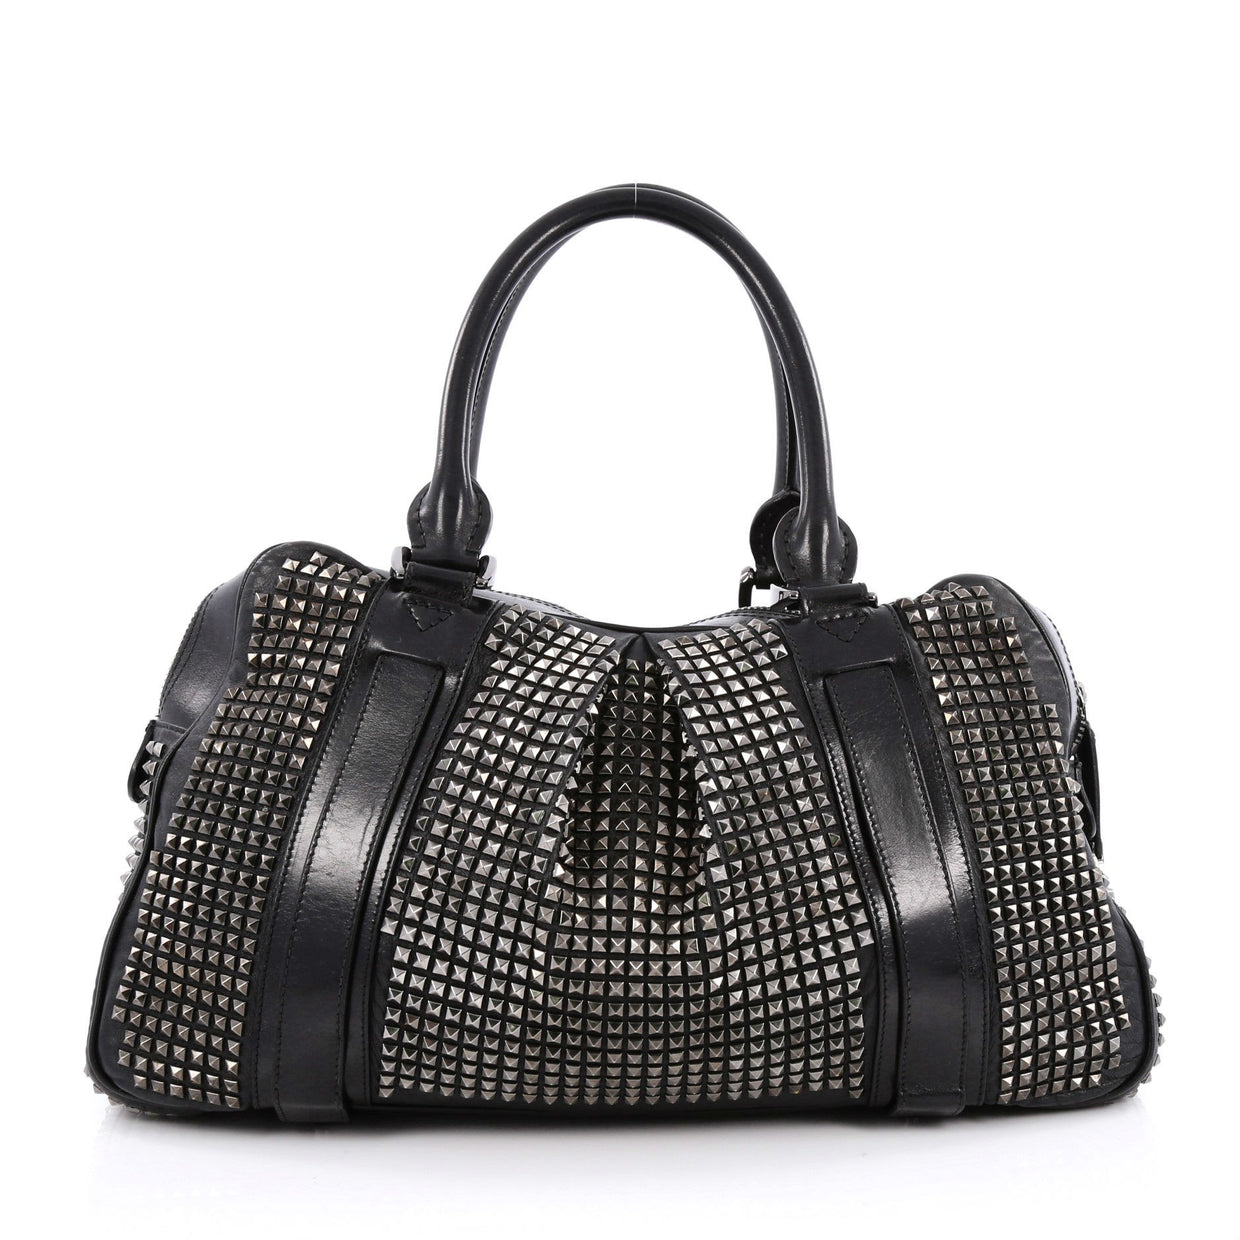 Burberry Knight Bag Studded Leather - Rebag